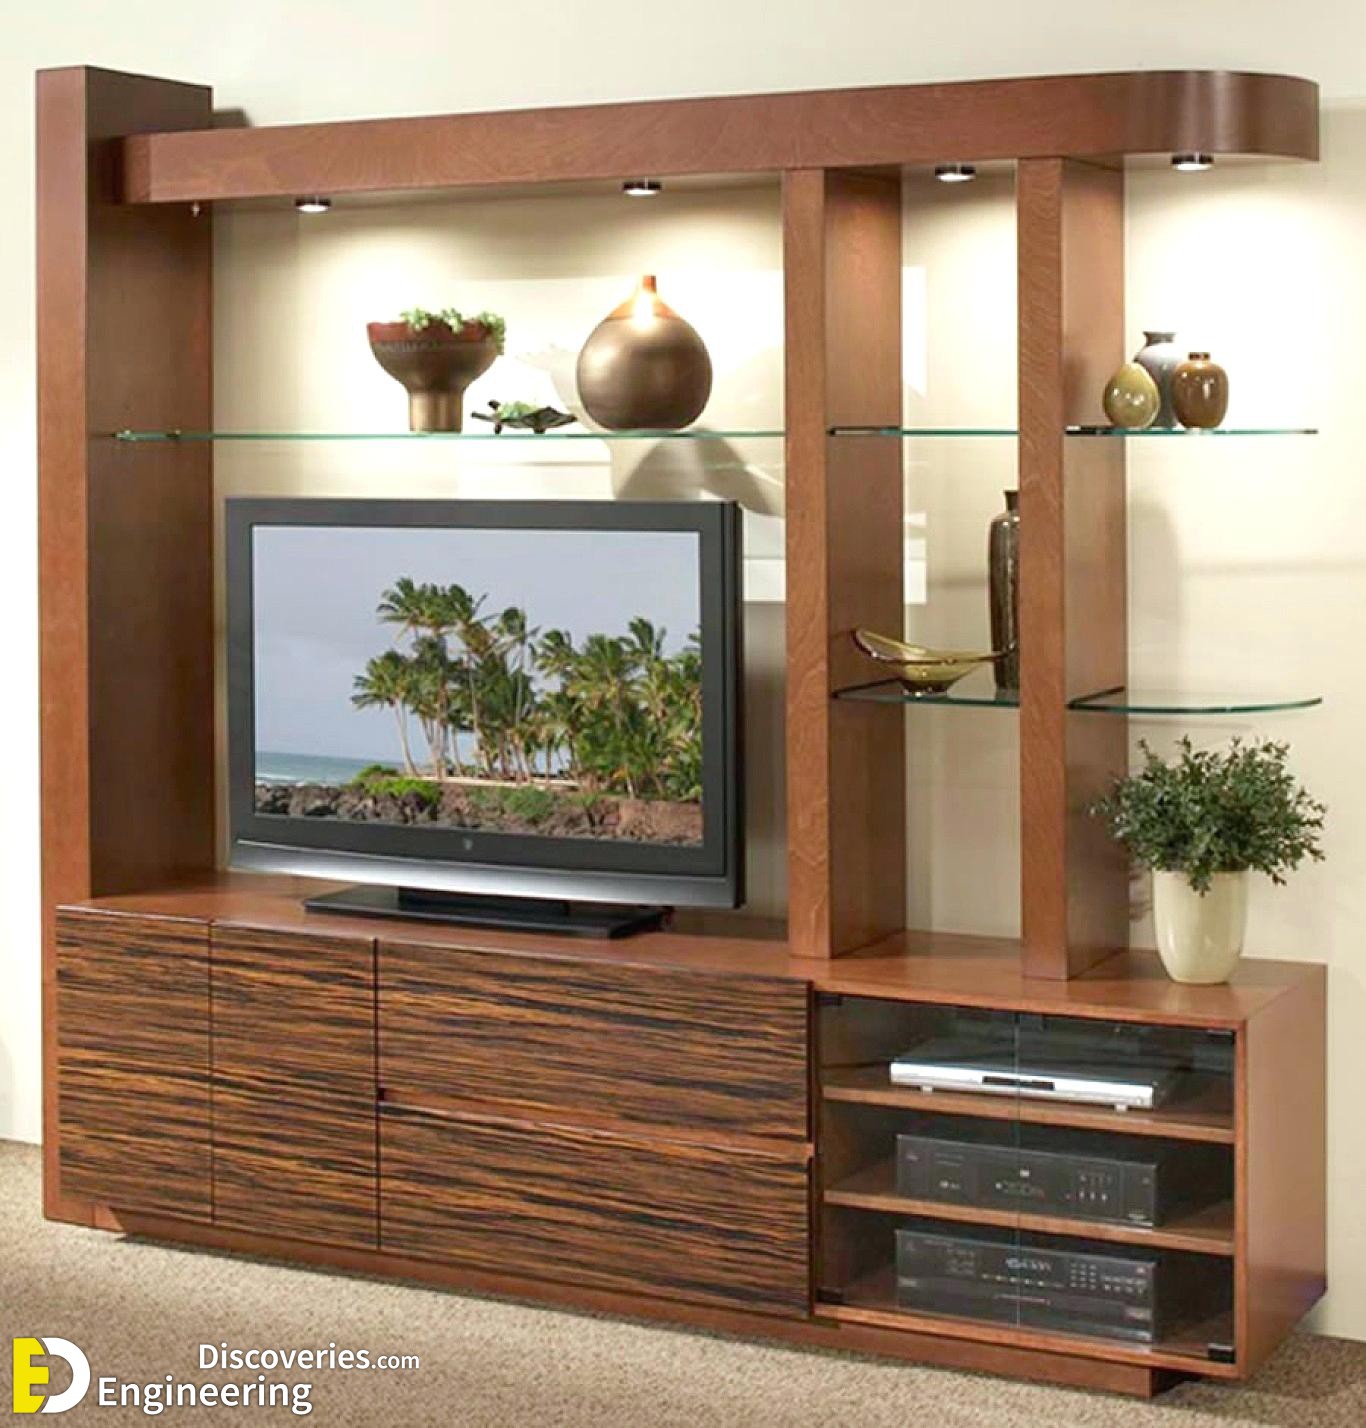 Top 50 Modern TV Stand Design Ideas For 2020 - Engineering Discoveries